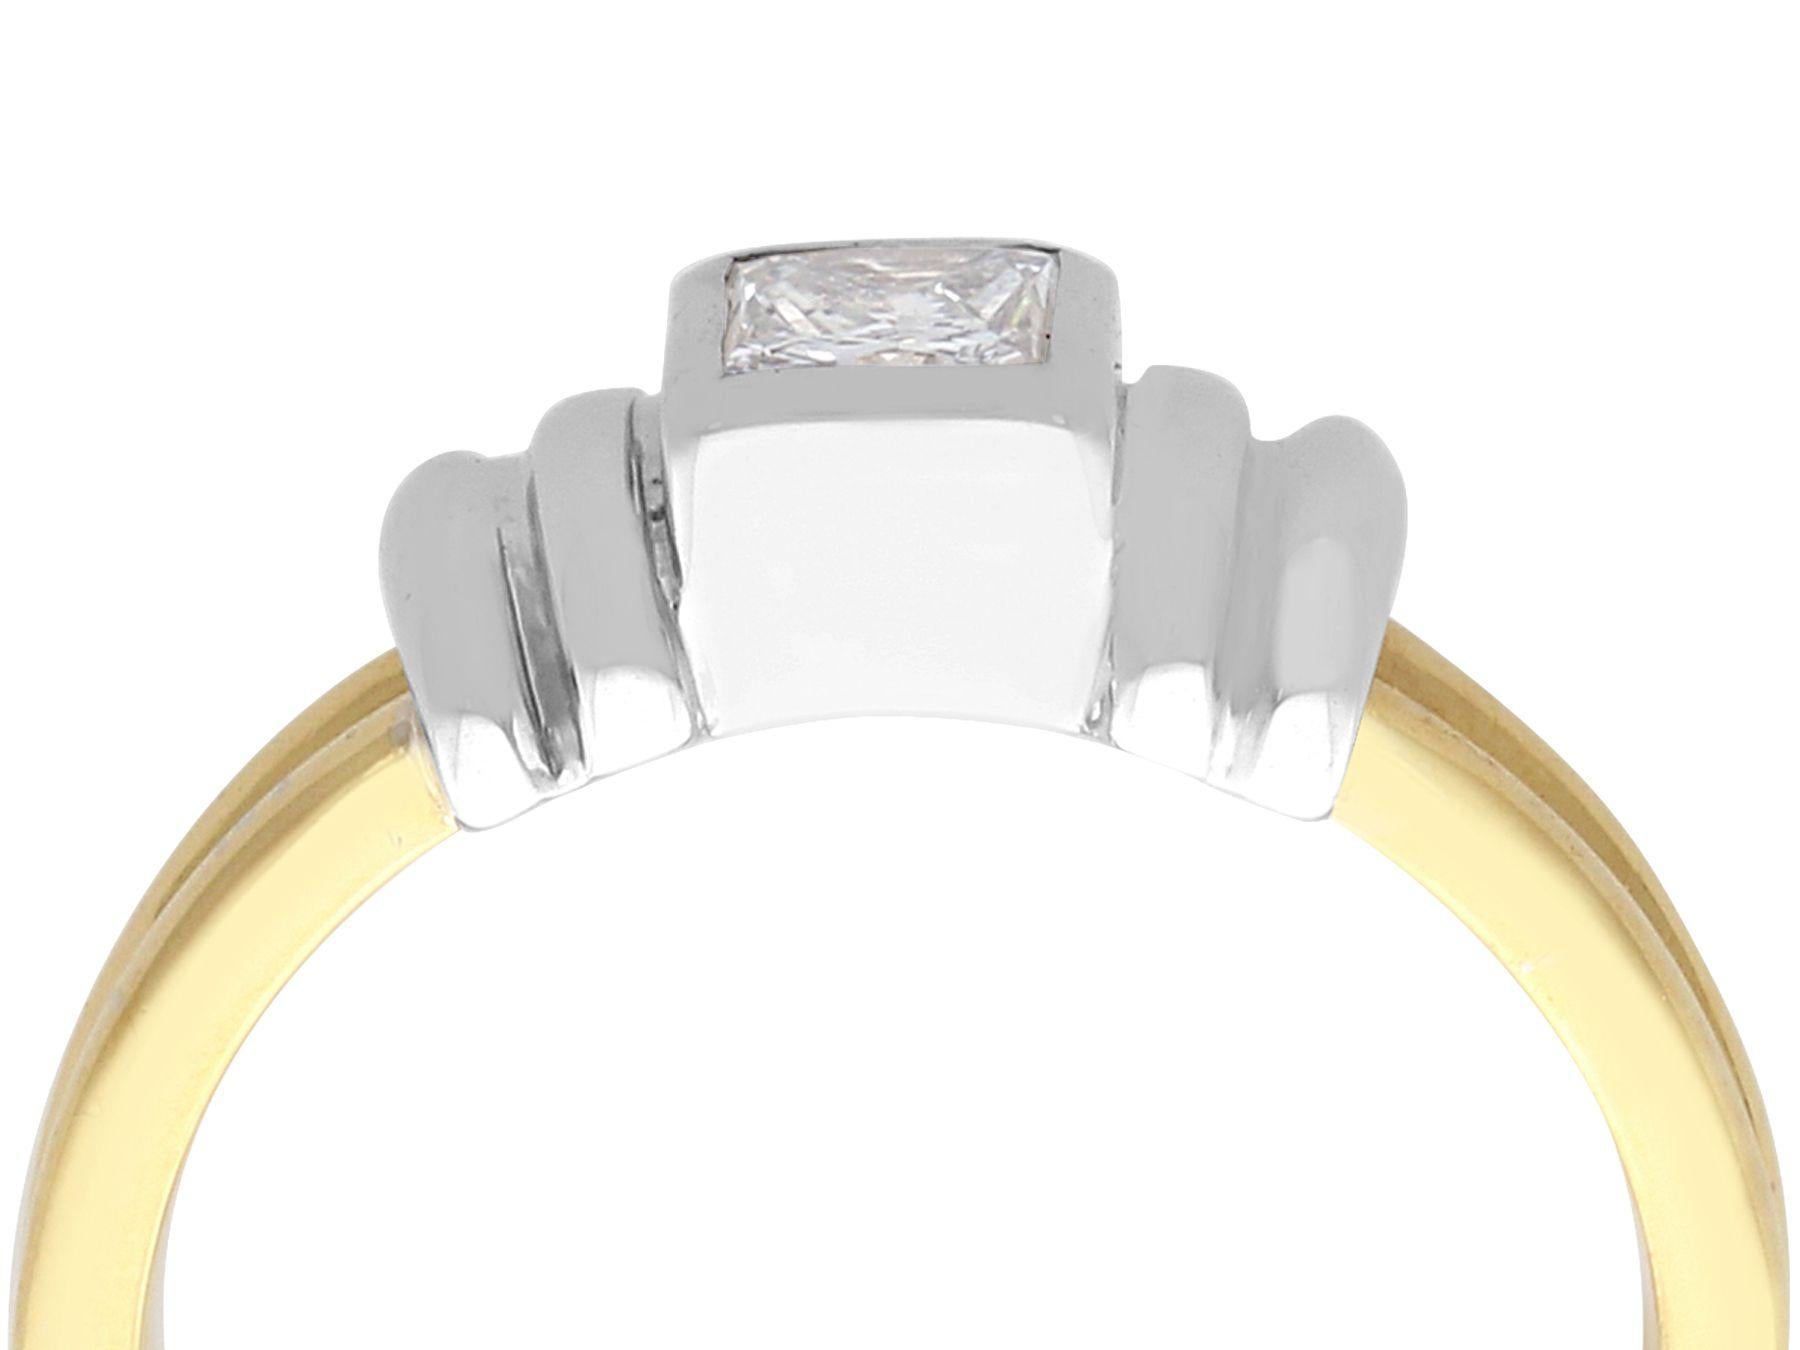 A fine and impressive 0.32 carat diamond and 18 karat yellow gold, platinum set, Art Deco style solitaire ring; part of our contemporary jewelry and diamond ring collections

This fine contemporary yellow gold princess cut diamond ring has been